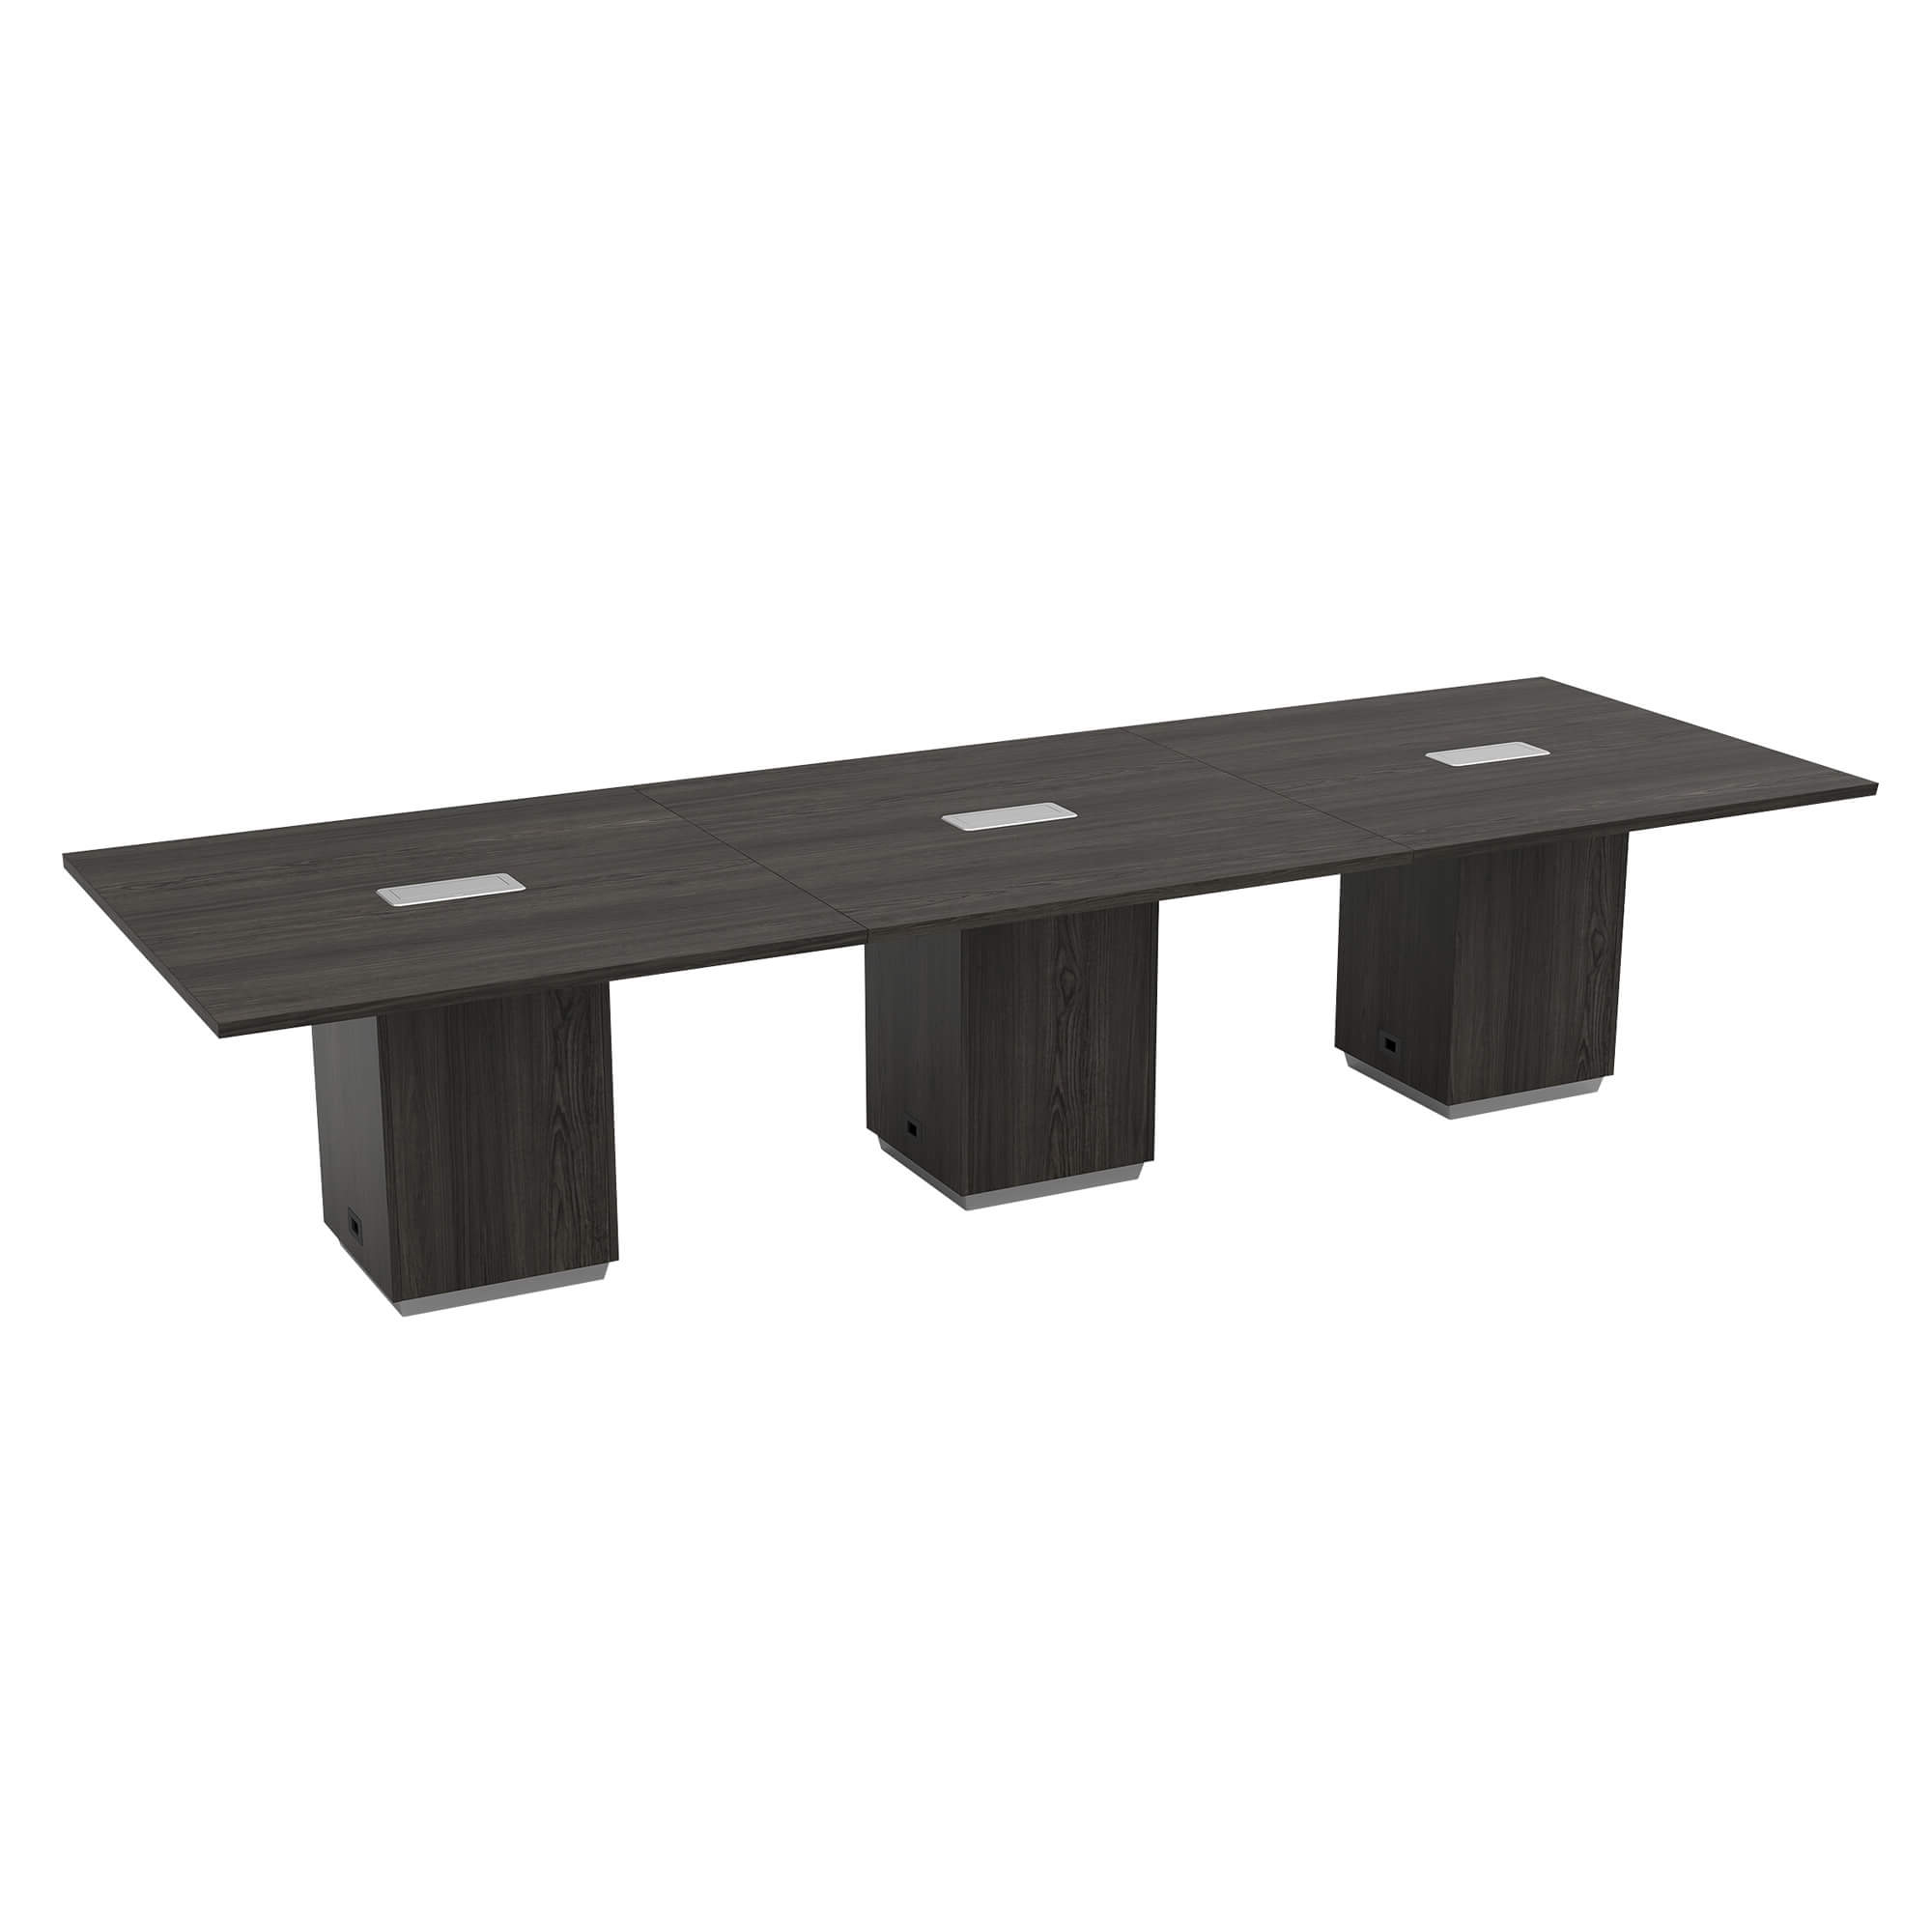 Conference tables CUB TUXSGW 62 PSO 1